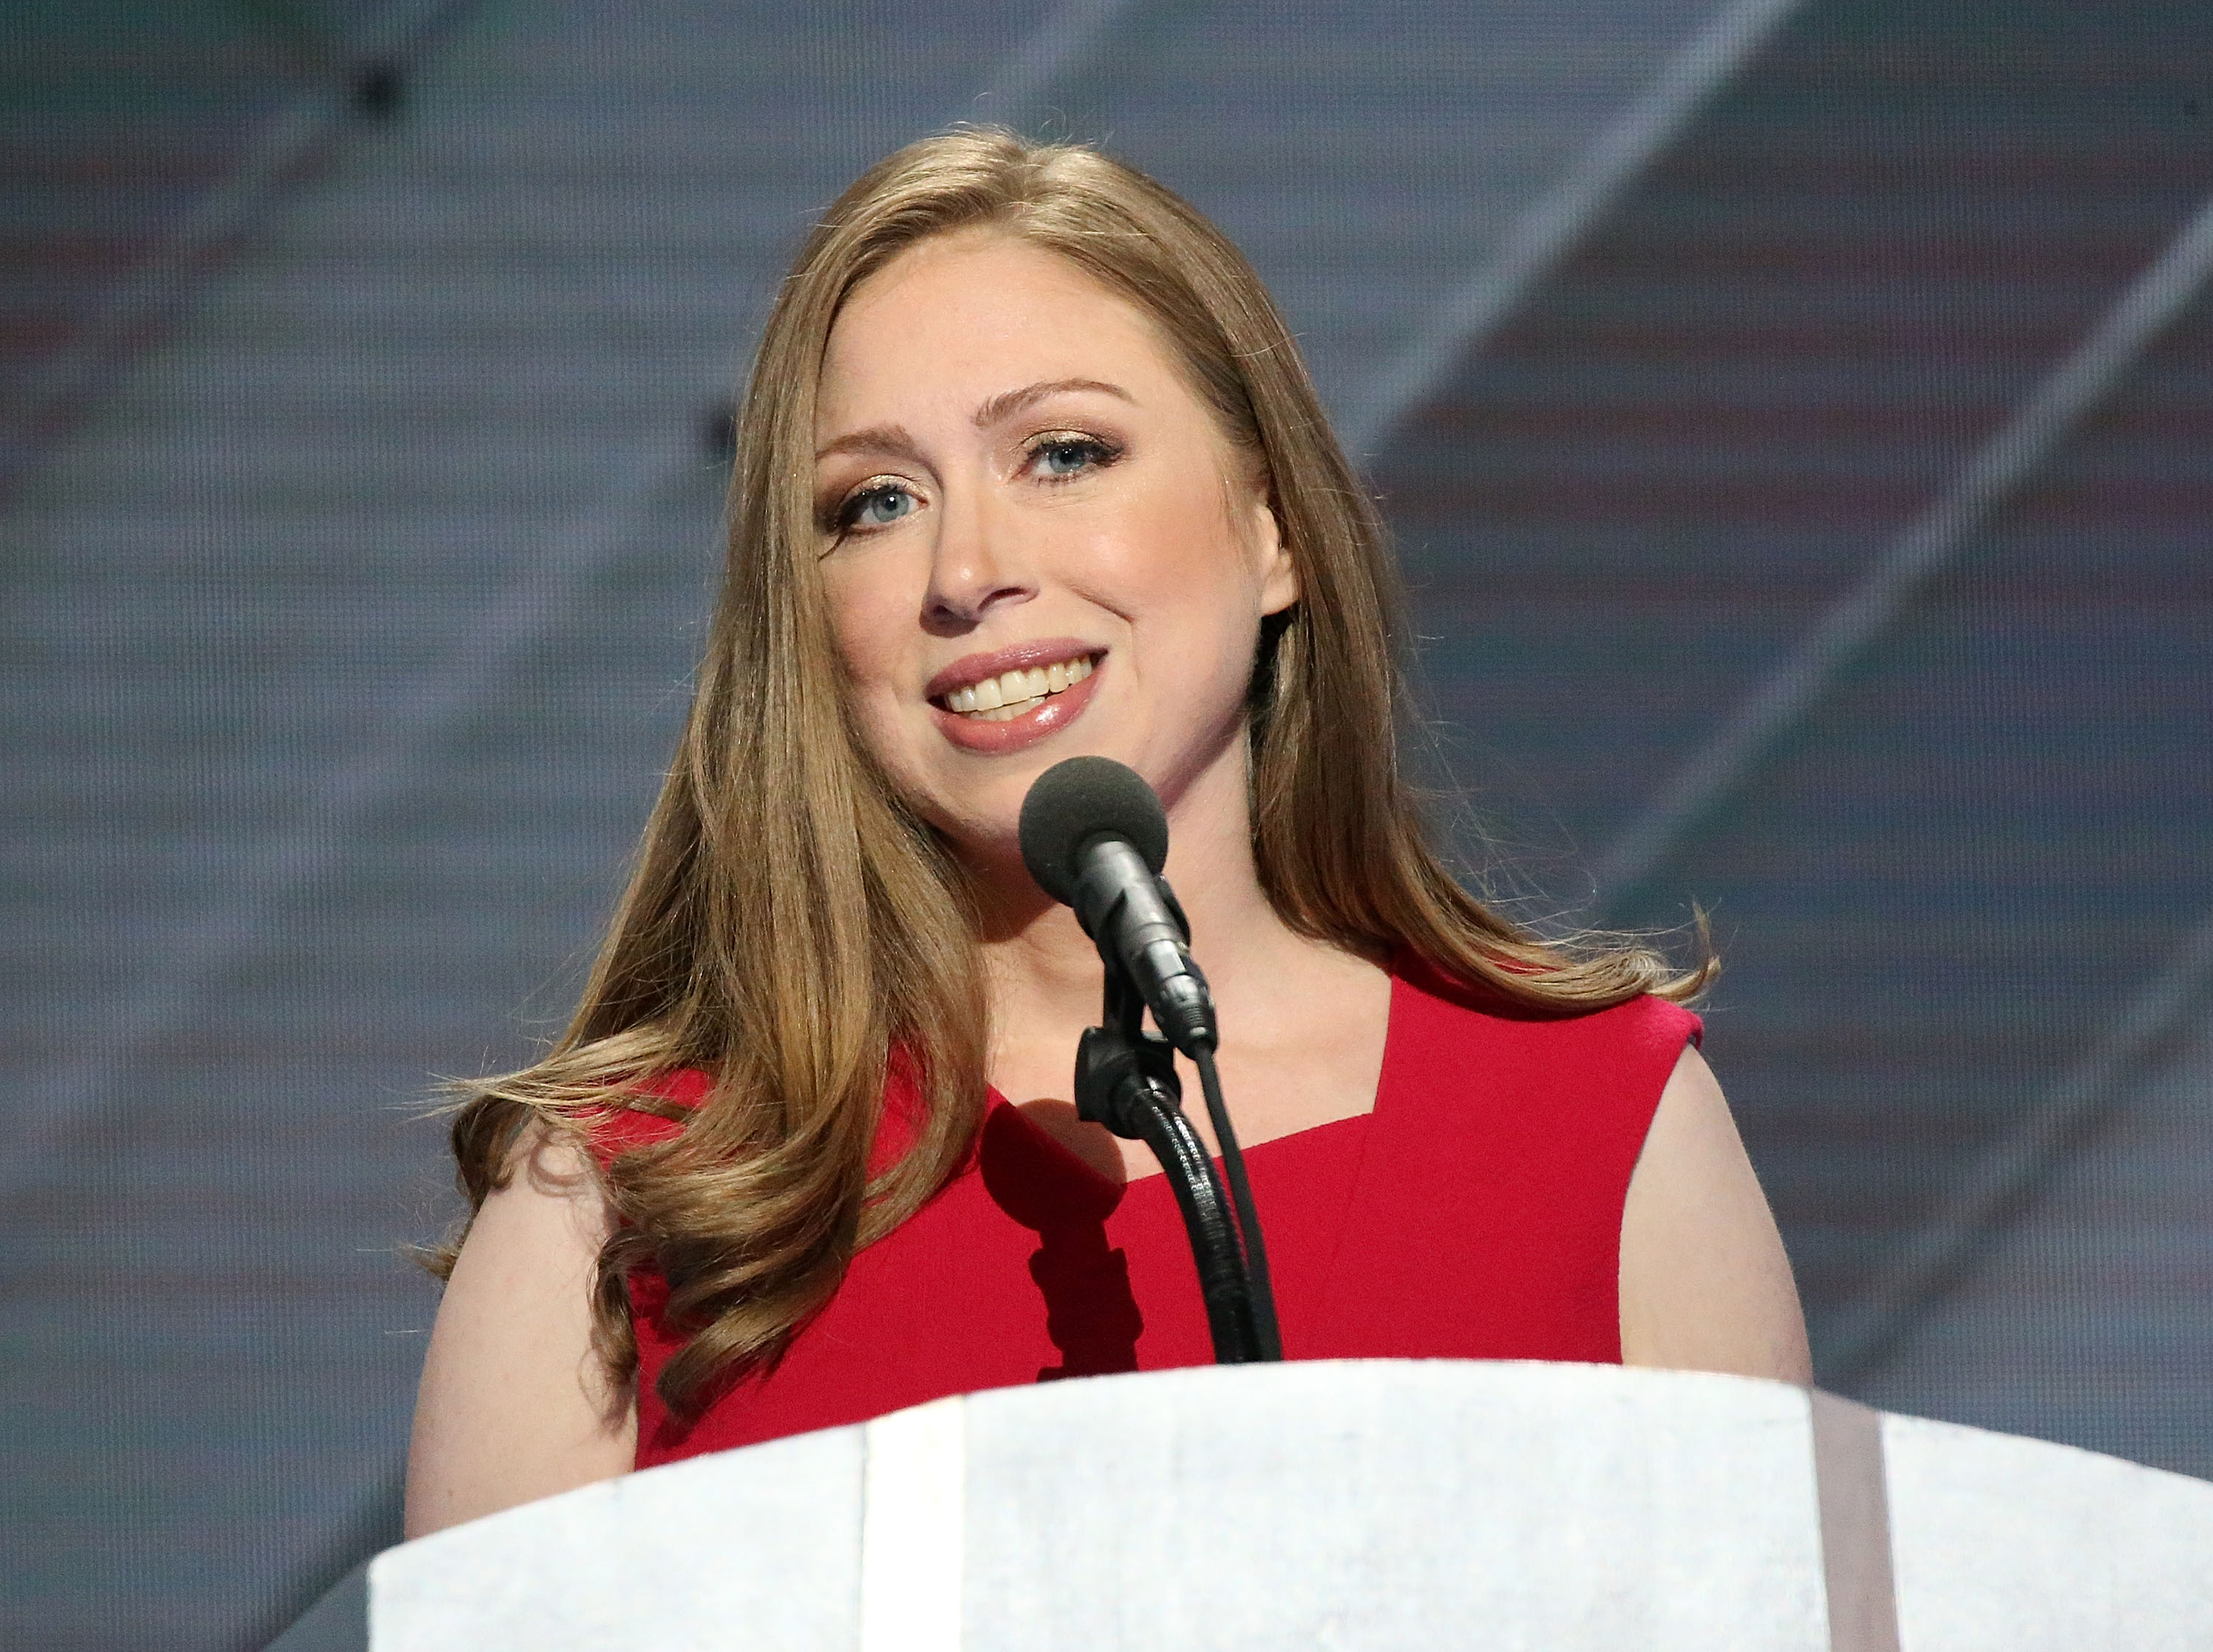 Chelsea Clinton delivers remarks on the fourth day of the Democratic National Convention at the Wells Fargo Center on July 28, 2016 in Philadelphia. (Paul Morigi—WireImage)